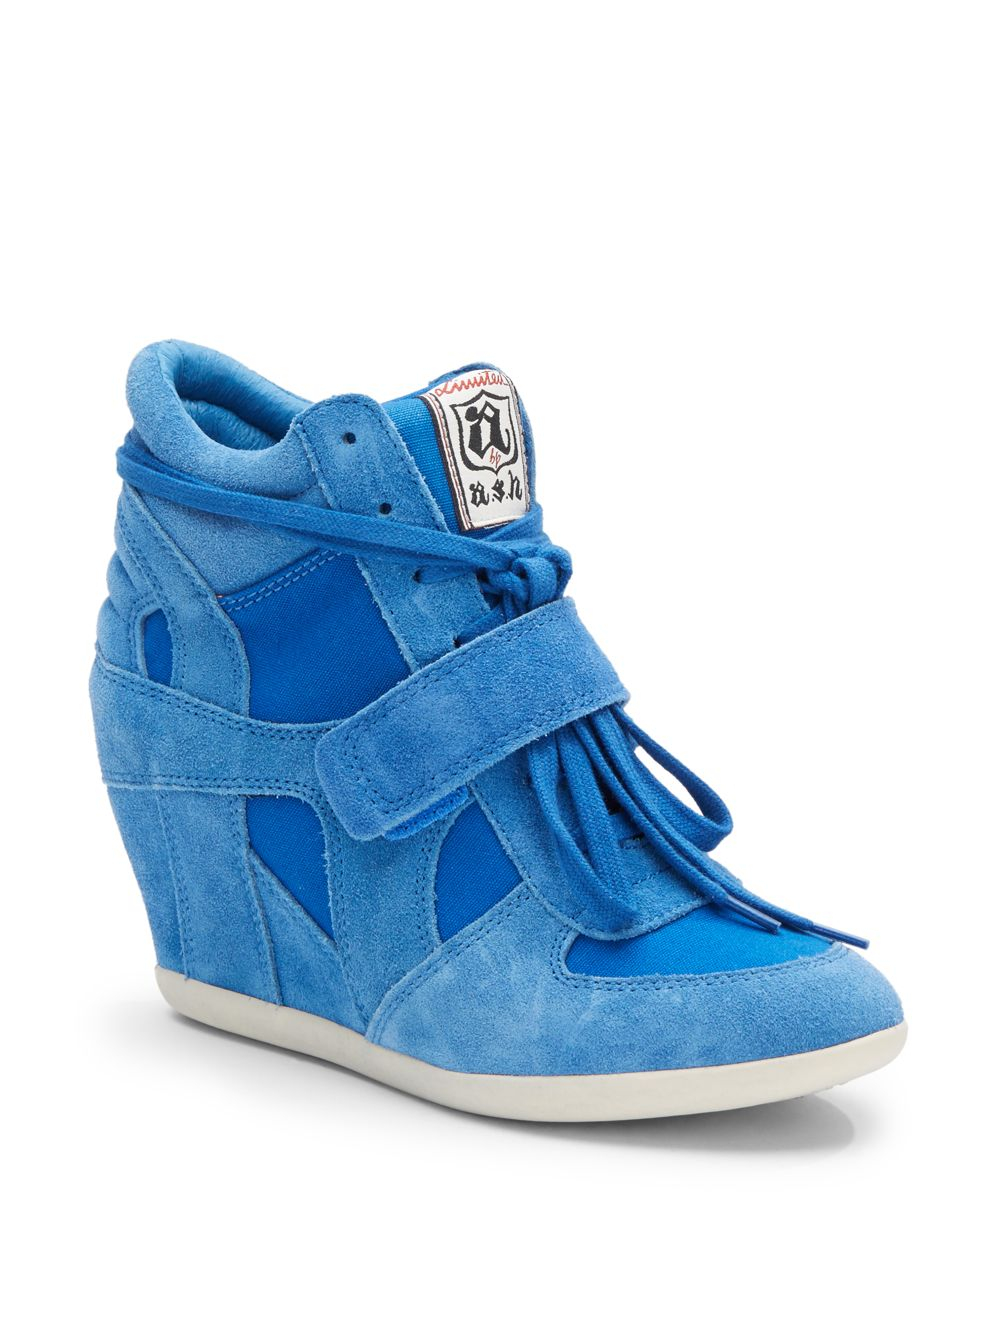 Ash Bowie Wedge Sneakers in Blue (royal blue) | Lyst